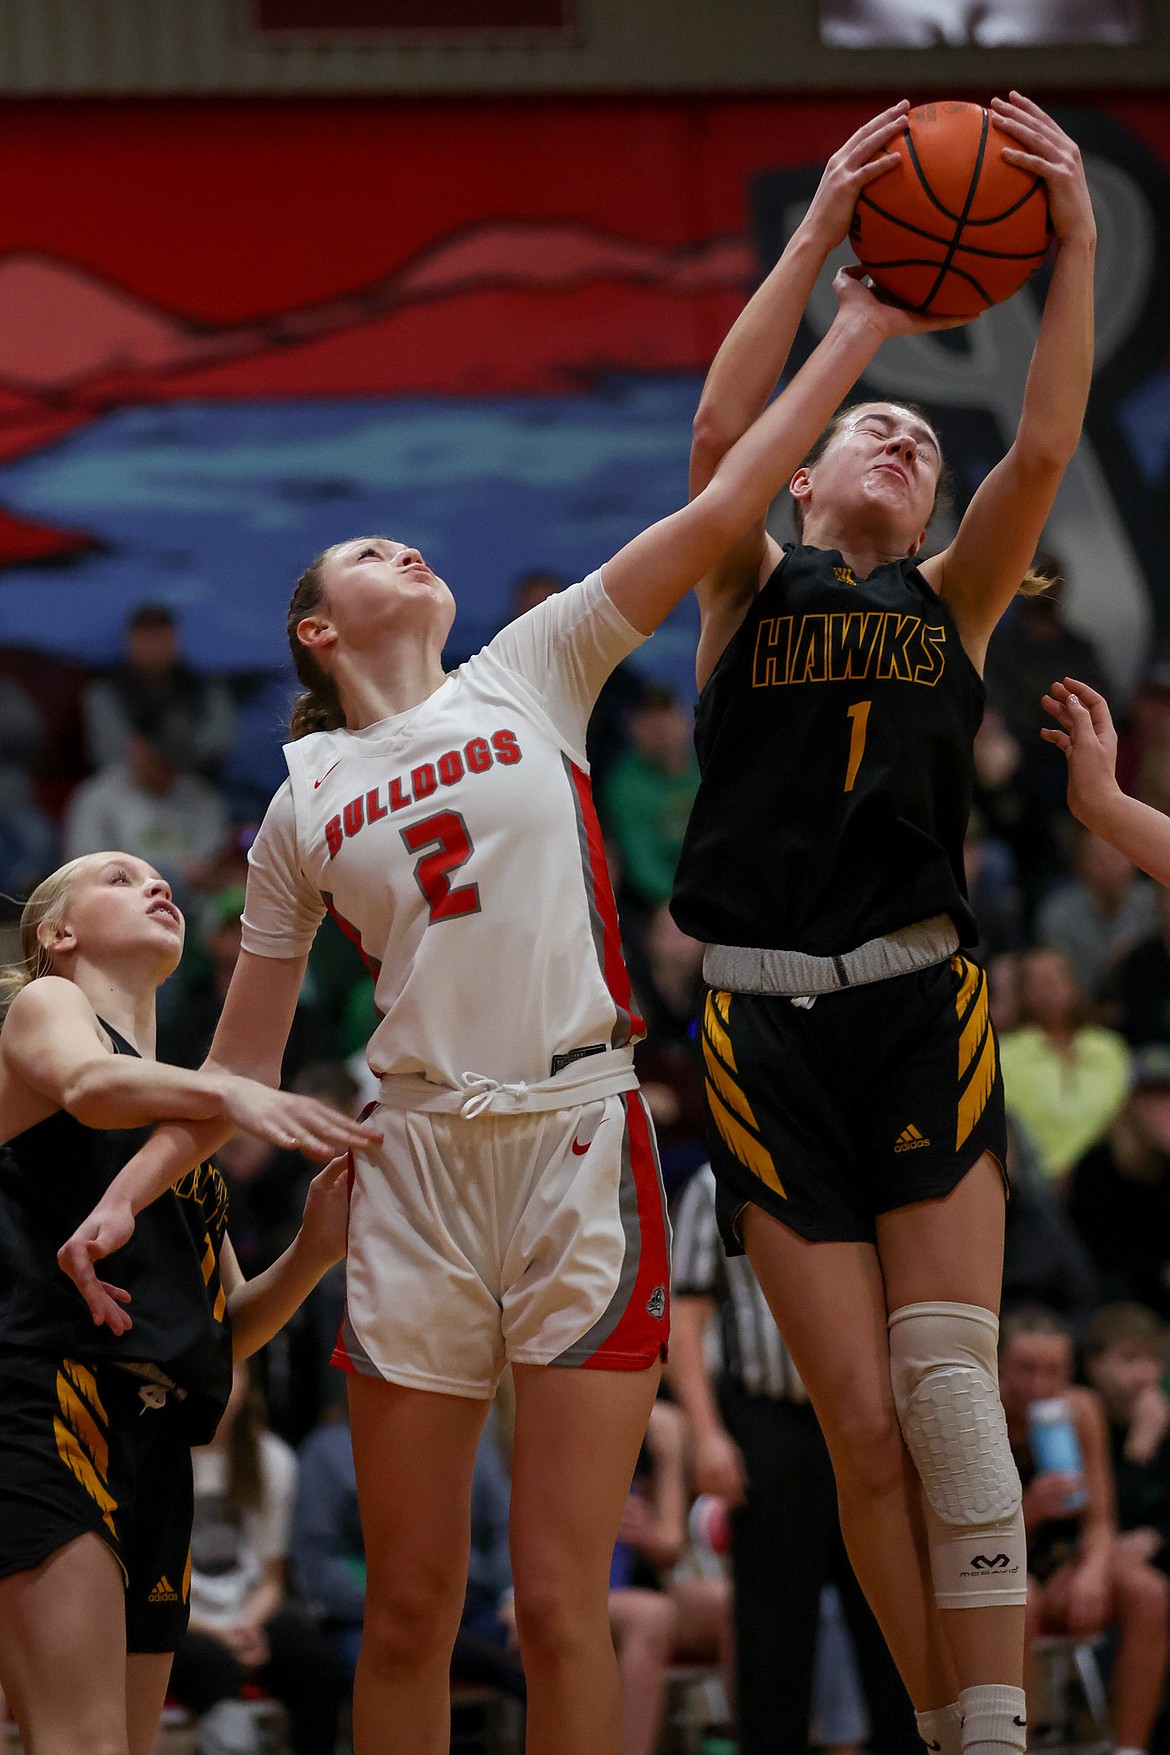 JASON DUCHOW PHOTOGRAPHY
Demi Driggs (2) of Sandpoint and Karstyn Kiefer (1) of Lakeland battle for a rebound Saturday night in Sandpoint, in the deciding game of a best-of-3 series for the 4A Region 1 title.